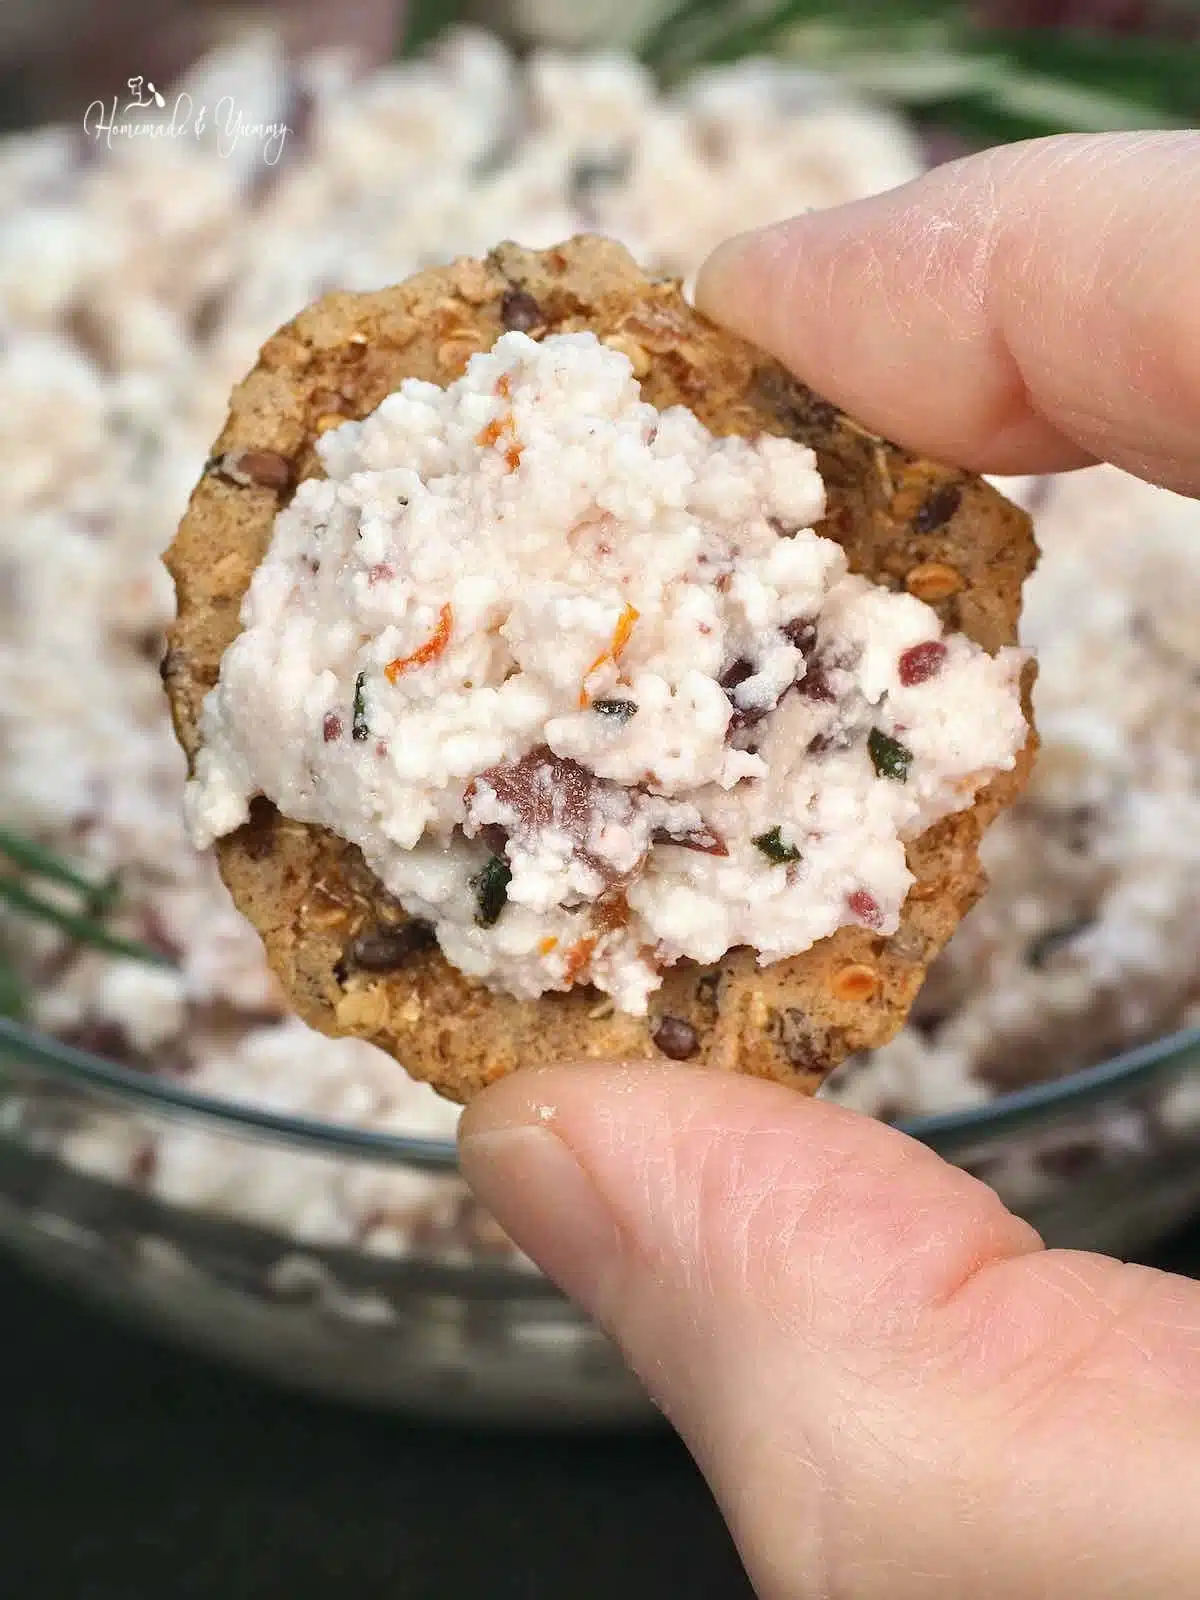 A cracker with ricotta spread.